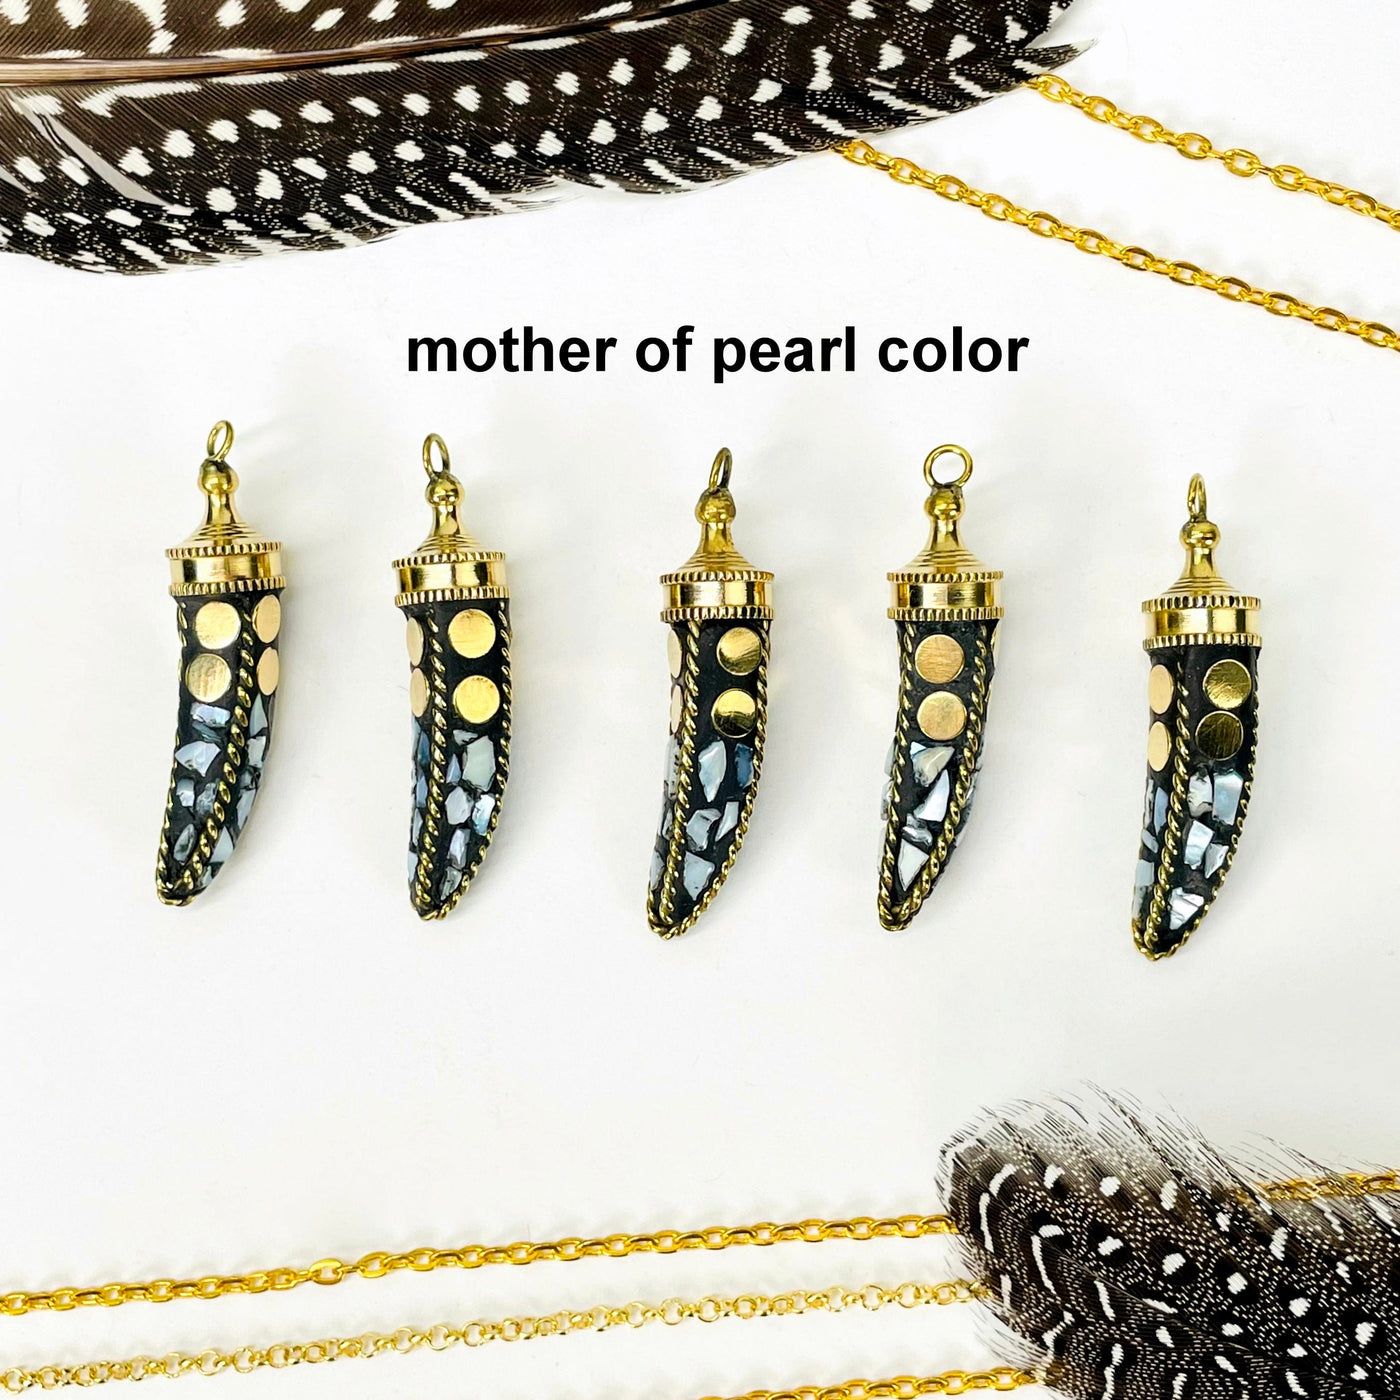 overhead view of five mother of pearl color petite mosaic horn pendants in a row on white background with decorations for possible variations